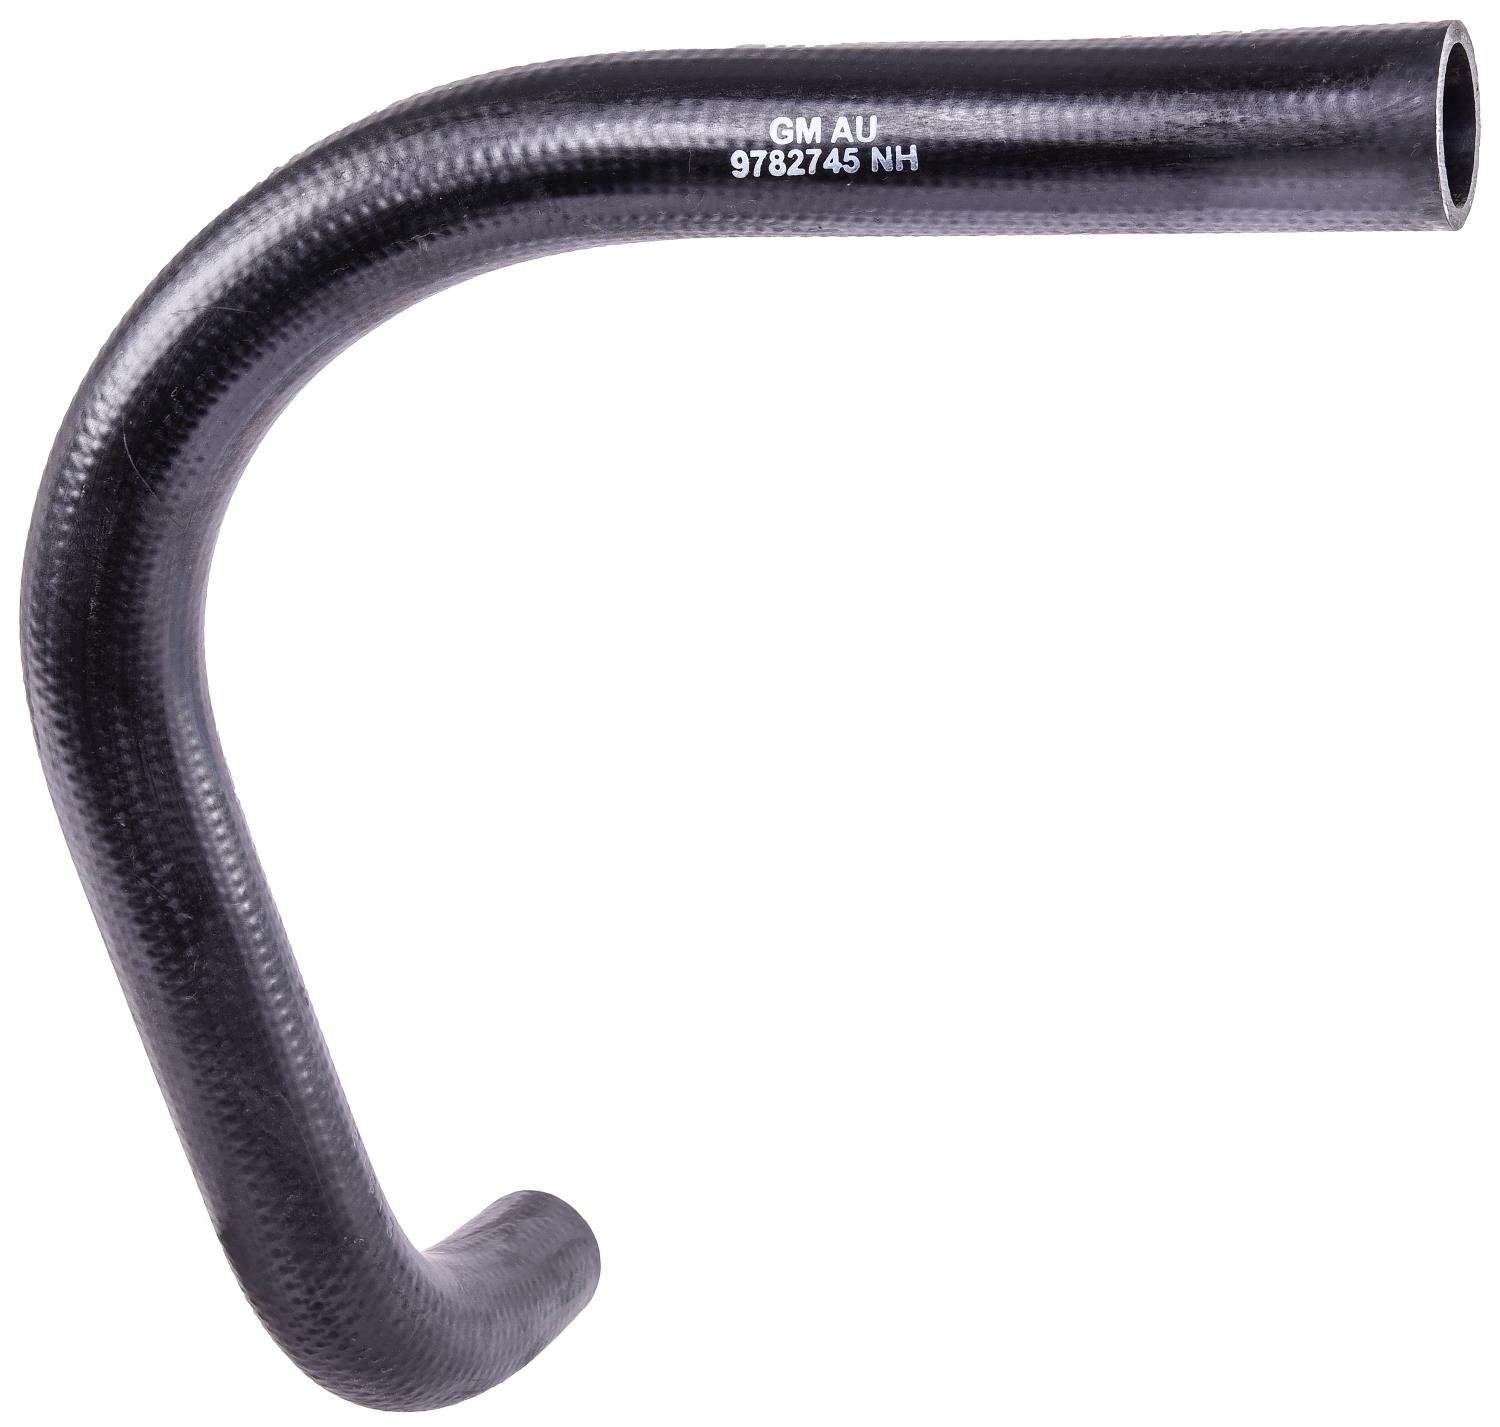 Upper Radiator Hose for 1966 Pontiac GTO, LeMans, Tempest [Direct-Fit Replacement for GM 9782745]